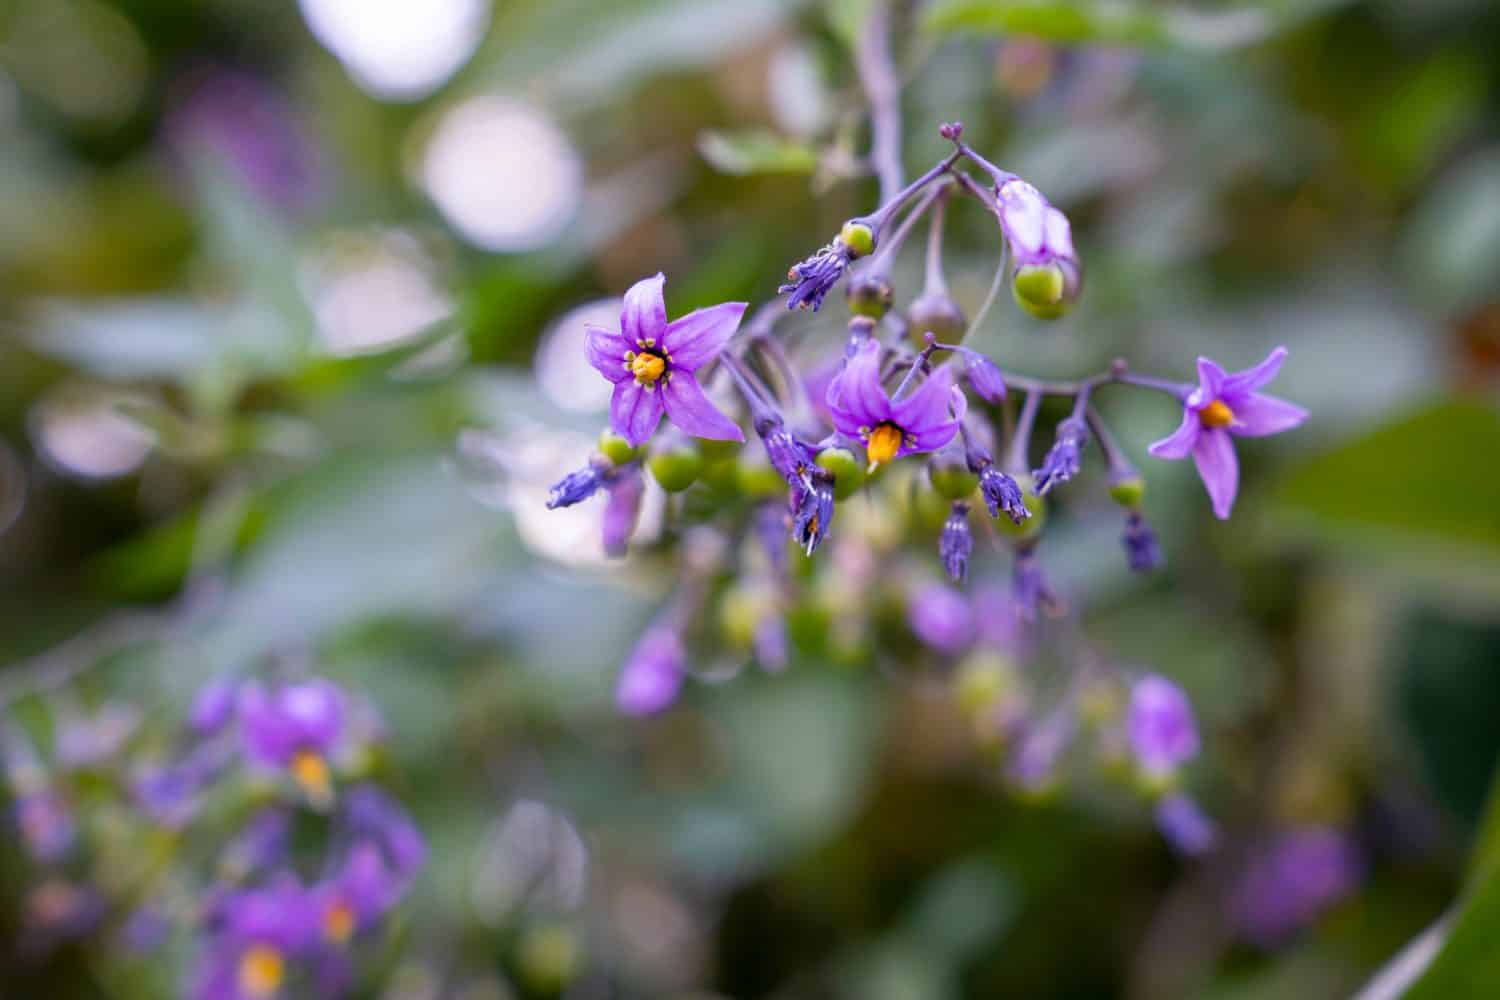 Bittersweet nightshade (Solanum dulcamara) flowers and buds with leaves close up